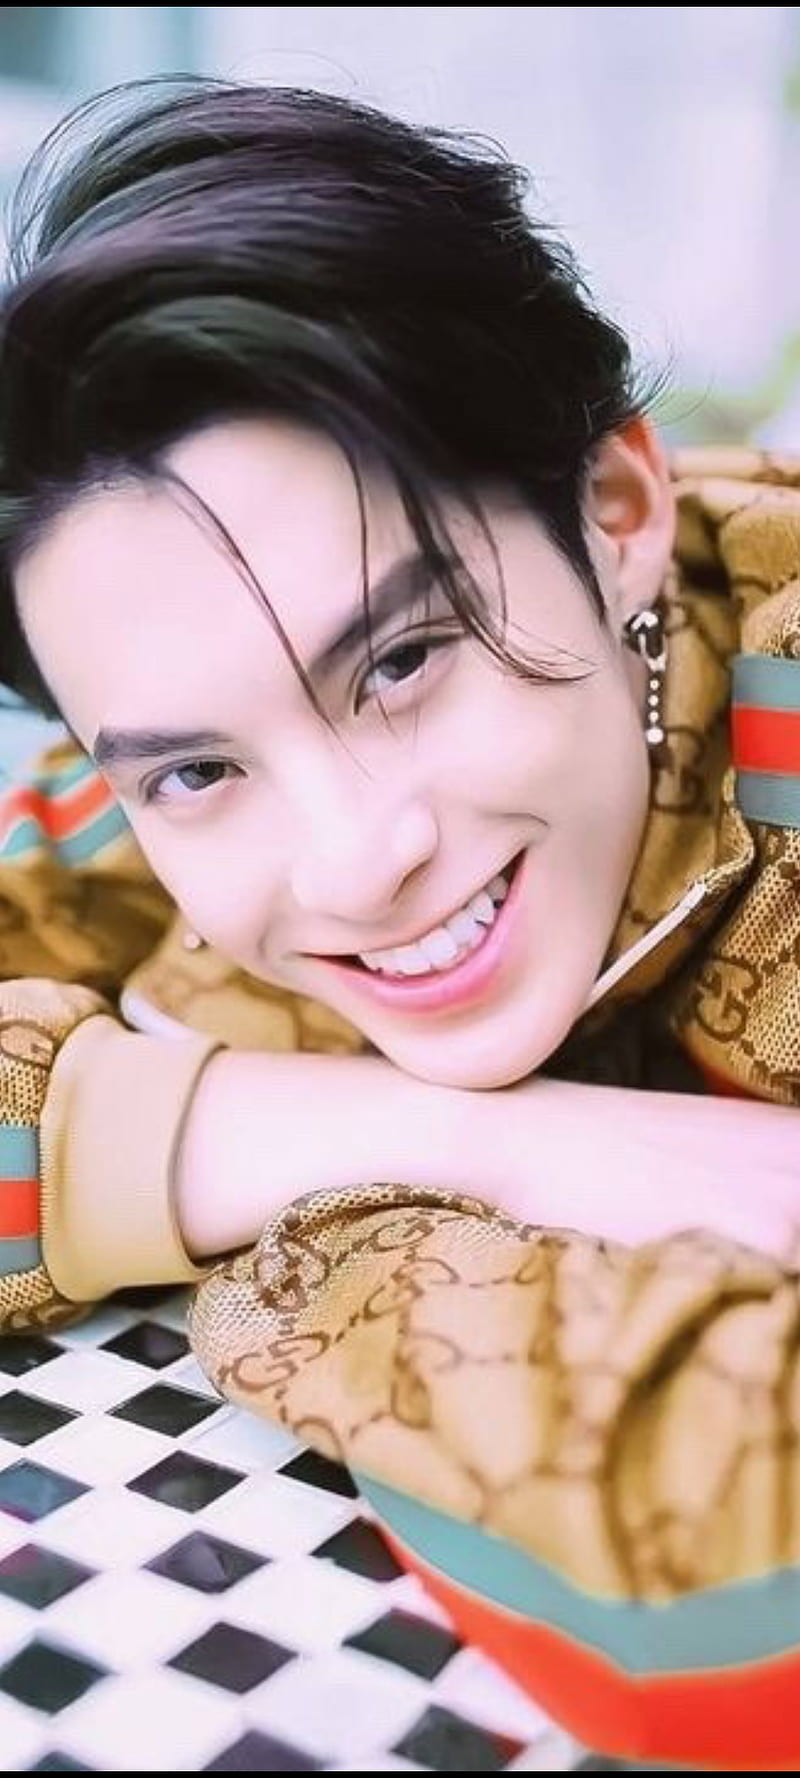 dylan wang pics on X: #DAILY_APPRECIATION post for Dylan: The